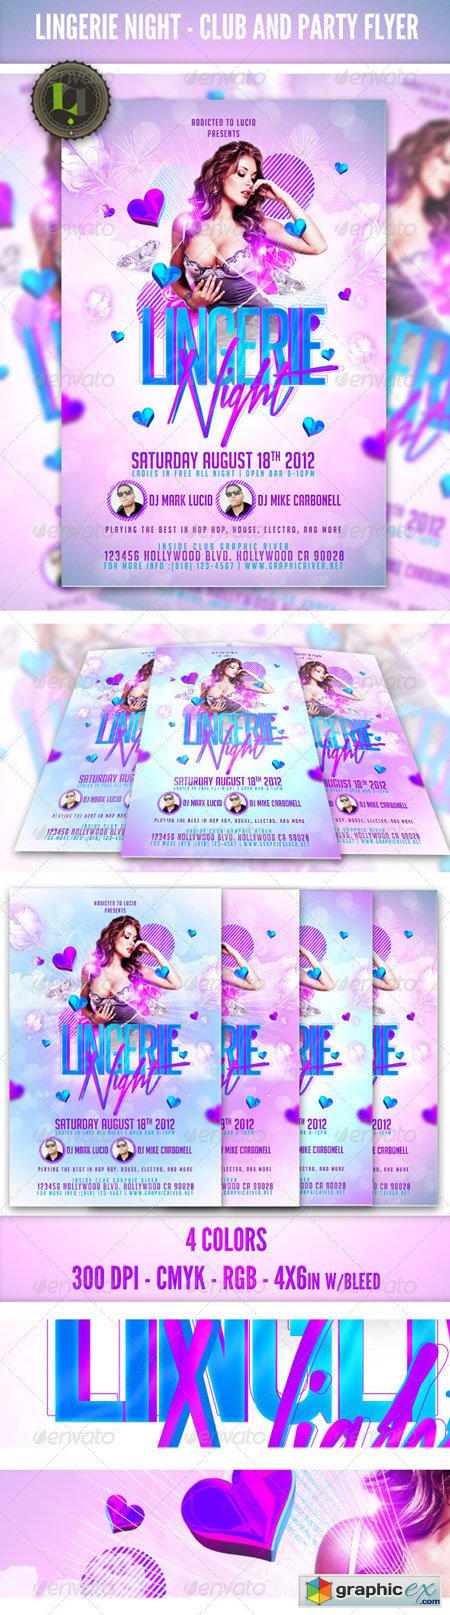 Ladies Night Party Club Flyer Template